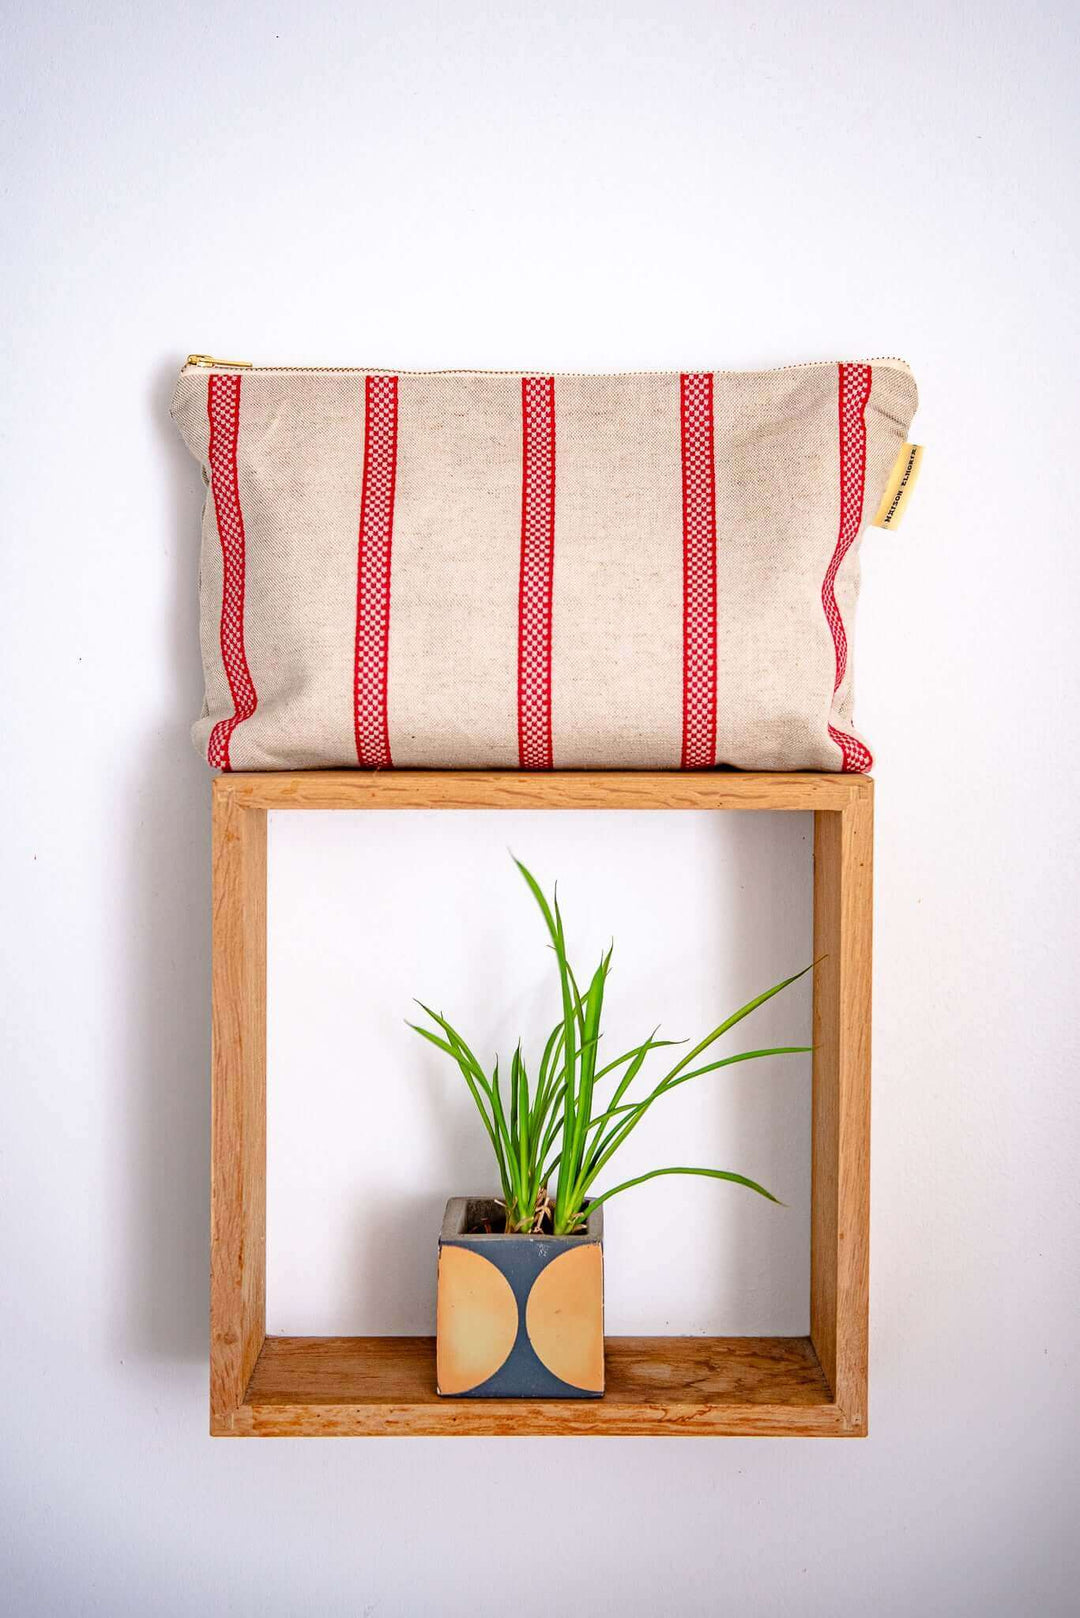 Red Striped linen toiletry bag on a wal wood frame with a small green plant below